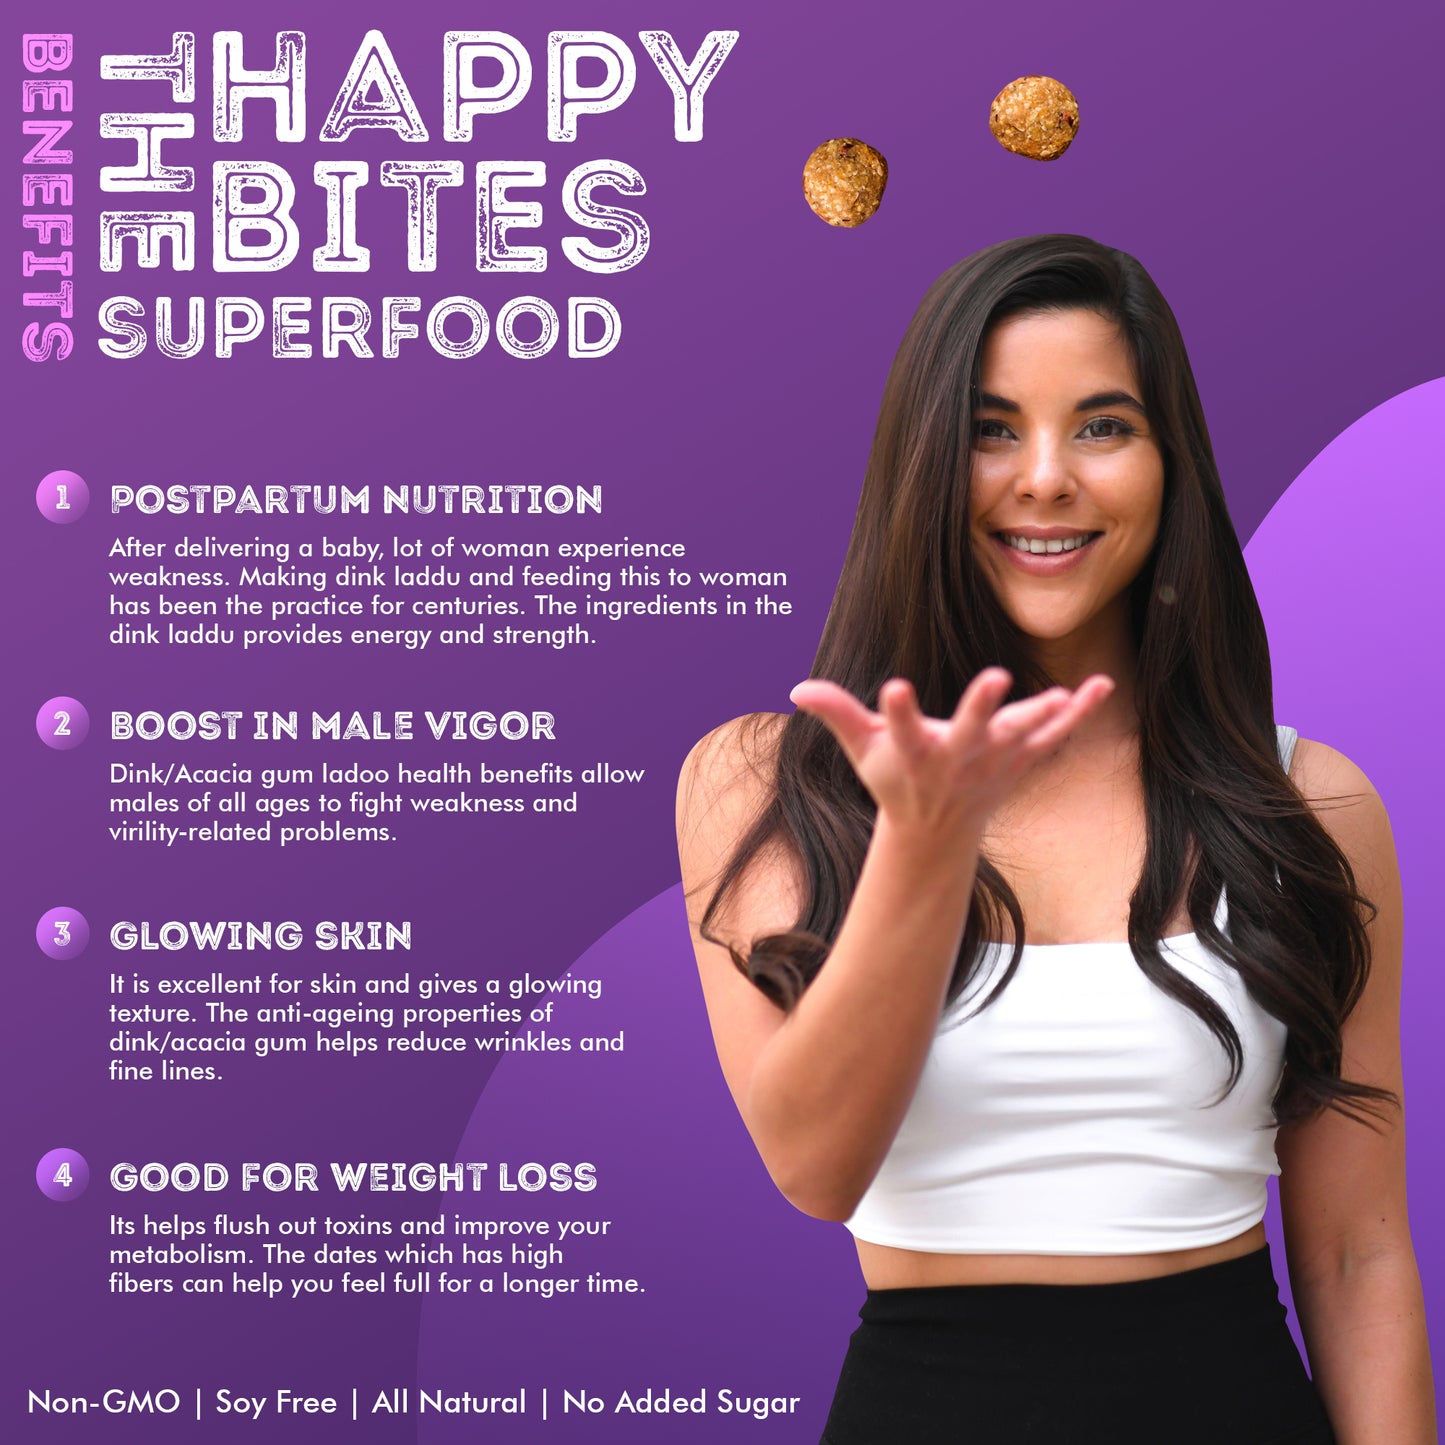 Indian Superfood Energy Balls, On-The-Go Single Serve Snack